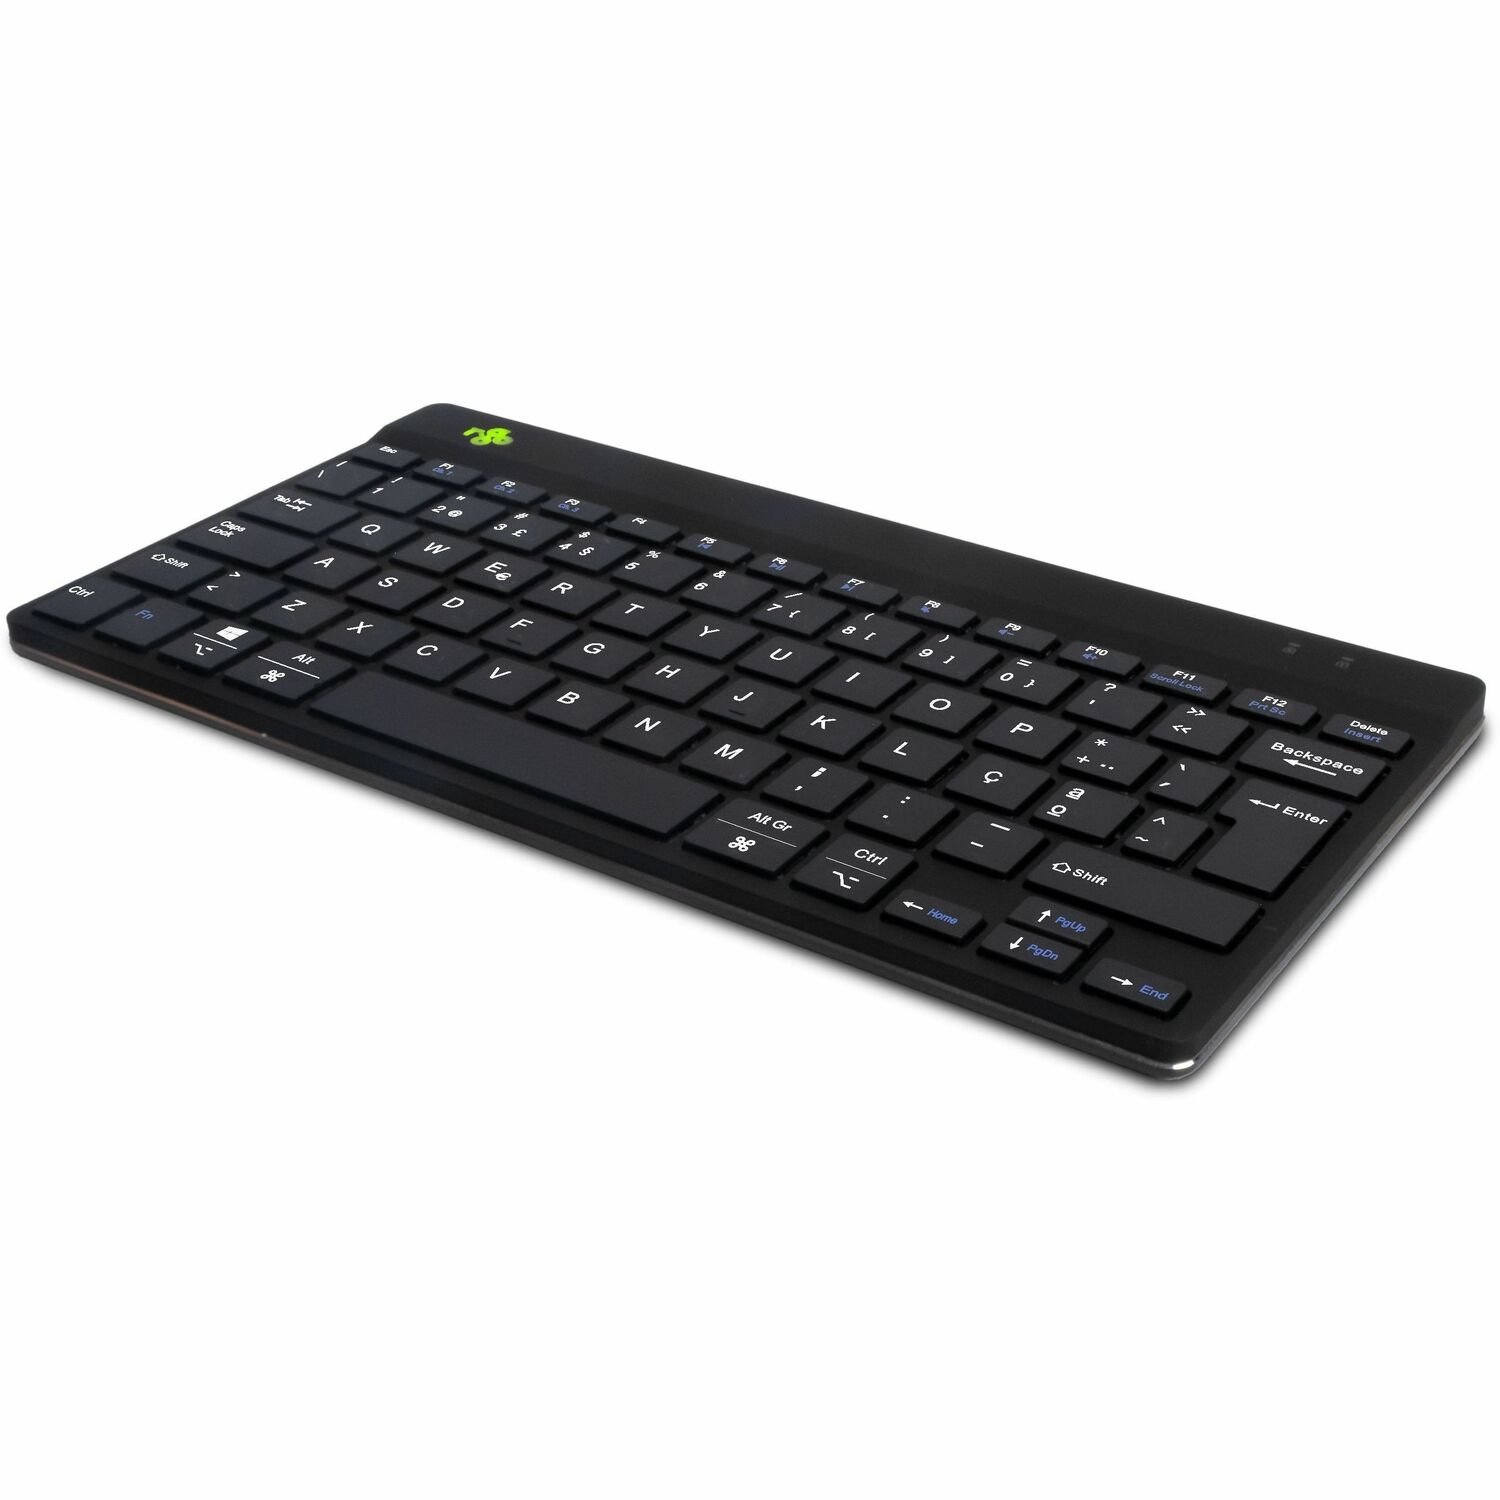 R-Go Compact Break Keyboard - Wireless Connectivity - Portuguese - QWERTY Layout - Black